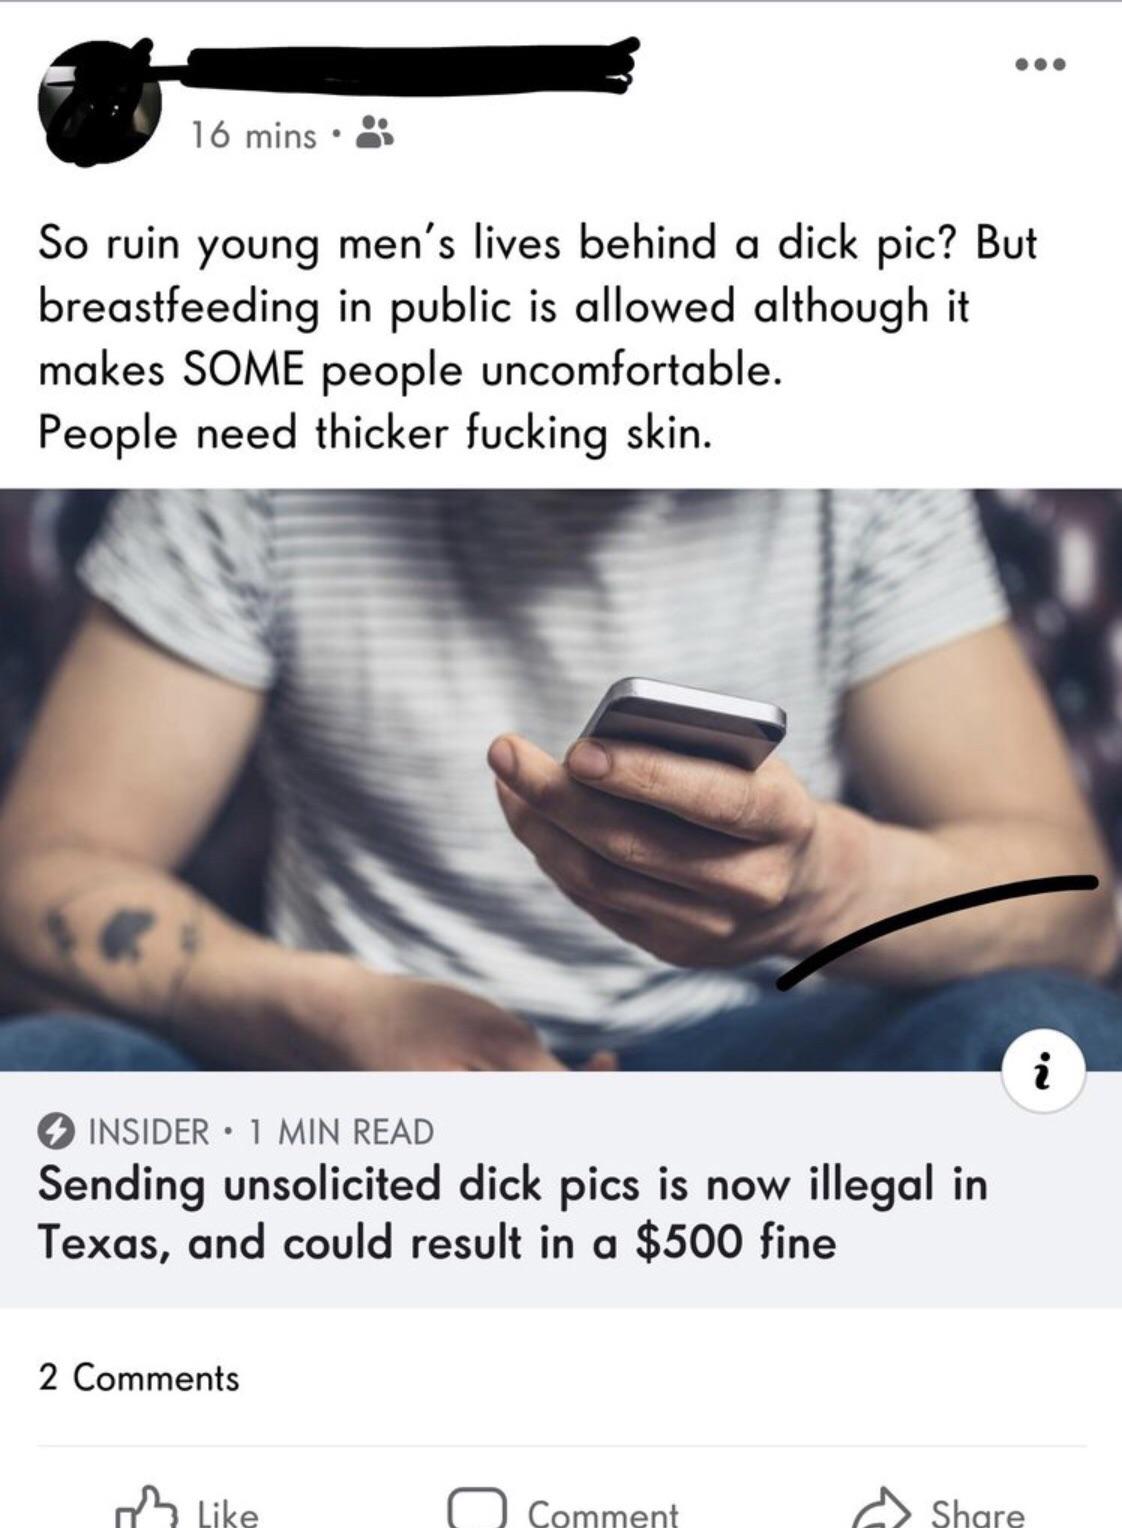 women feminine-memes women text: 16 mins • So ruin young men's lives behind a dick pic? But breastfeeding in public is allowed although it makes SOME people uncomfortable. People need thicker fucking skin. Pi O INSIDER • I MIN READ Sending unsolicited dick pics is now illegal in Texas, and could result in a $500 fine 2 Comments i 